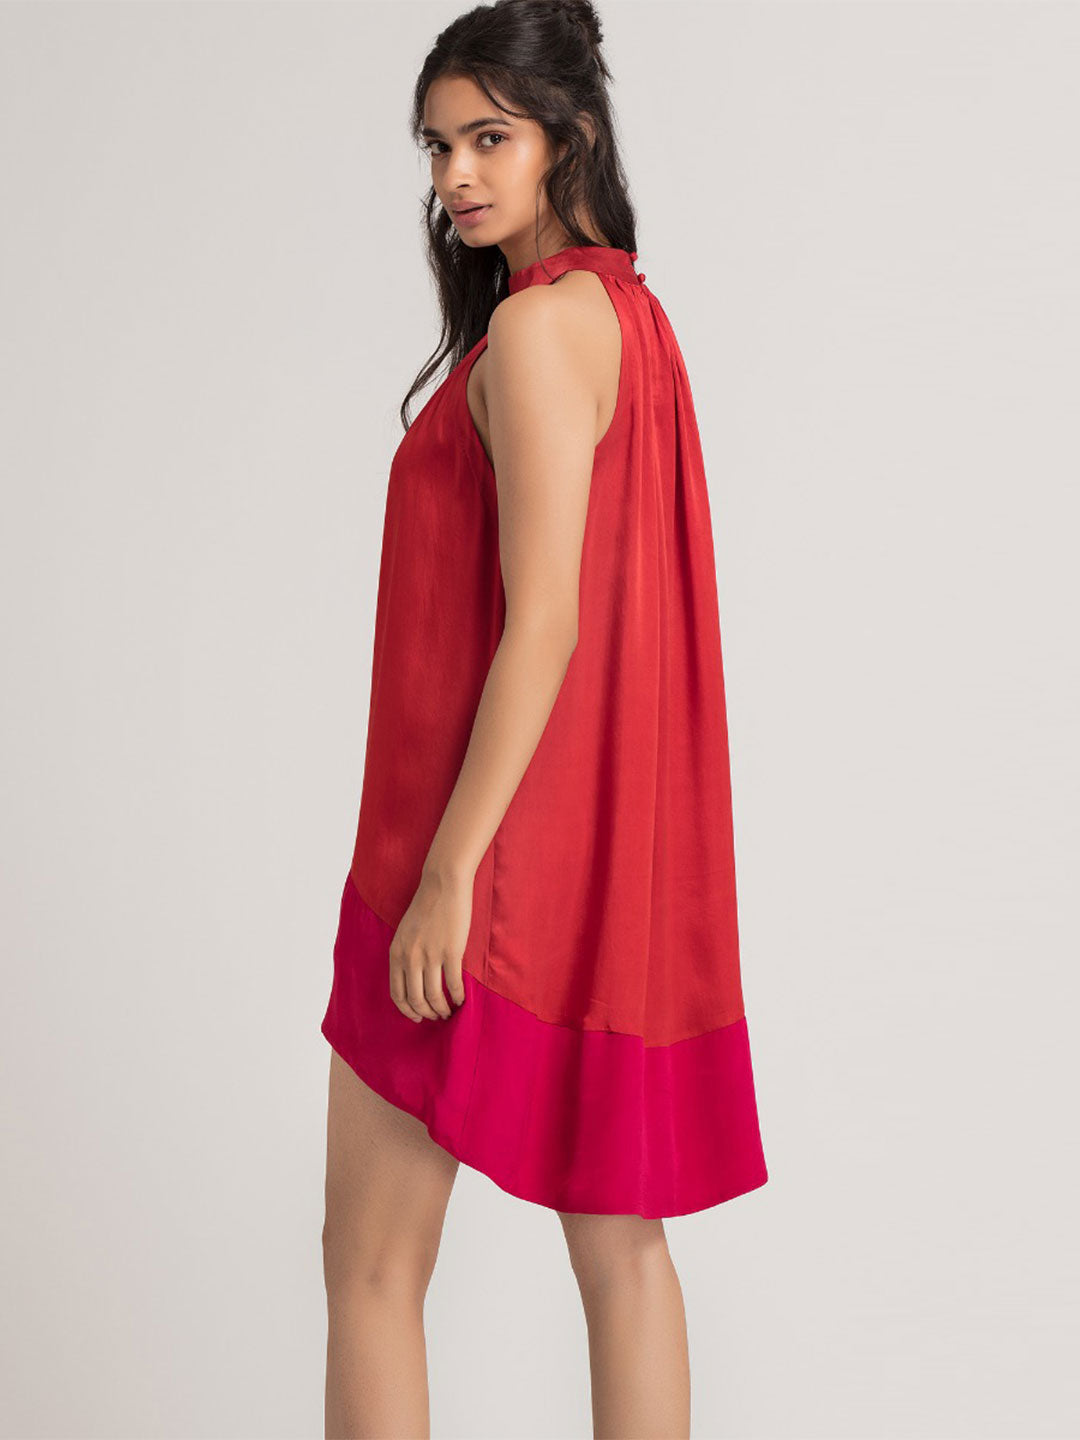 Red and Magenta High-Low Dress from Shaye , Dress for women